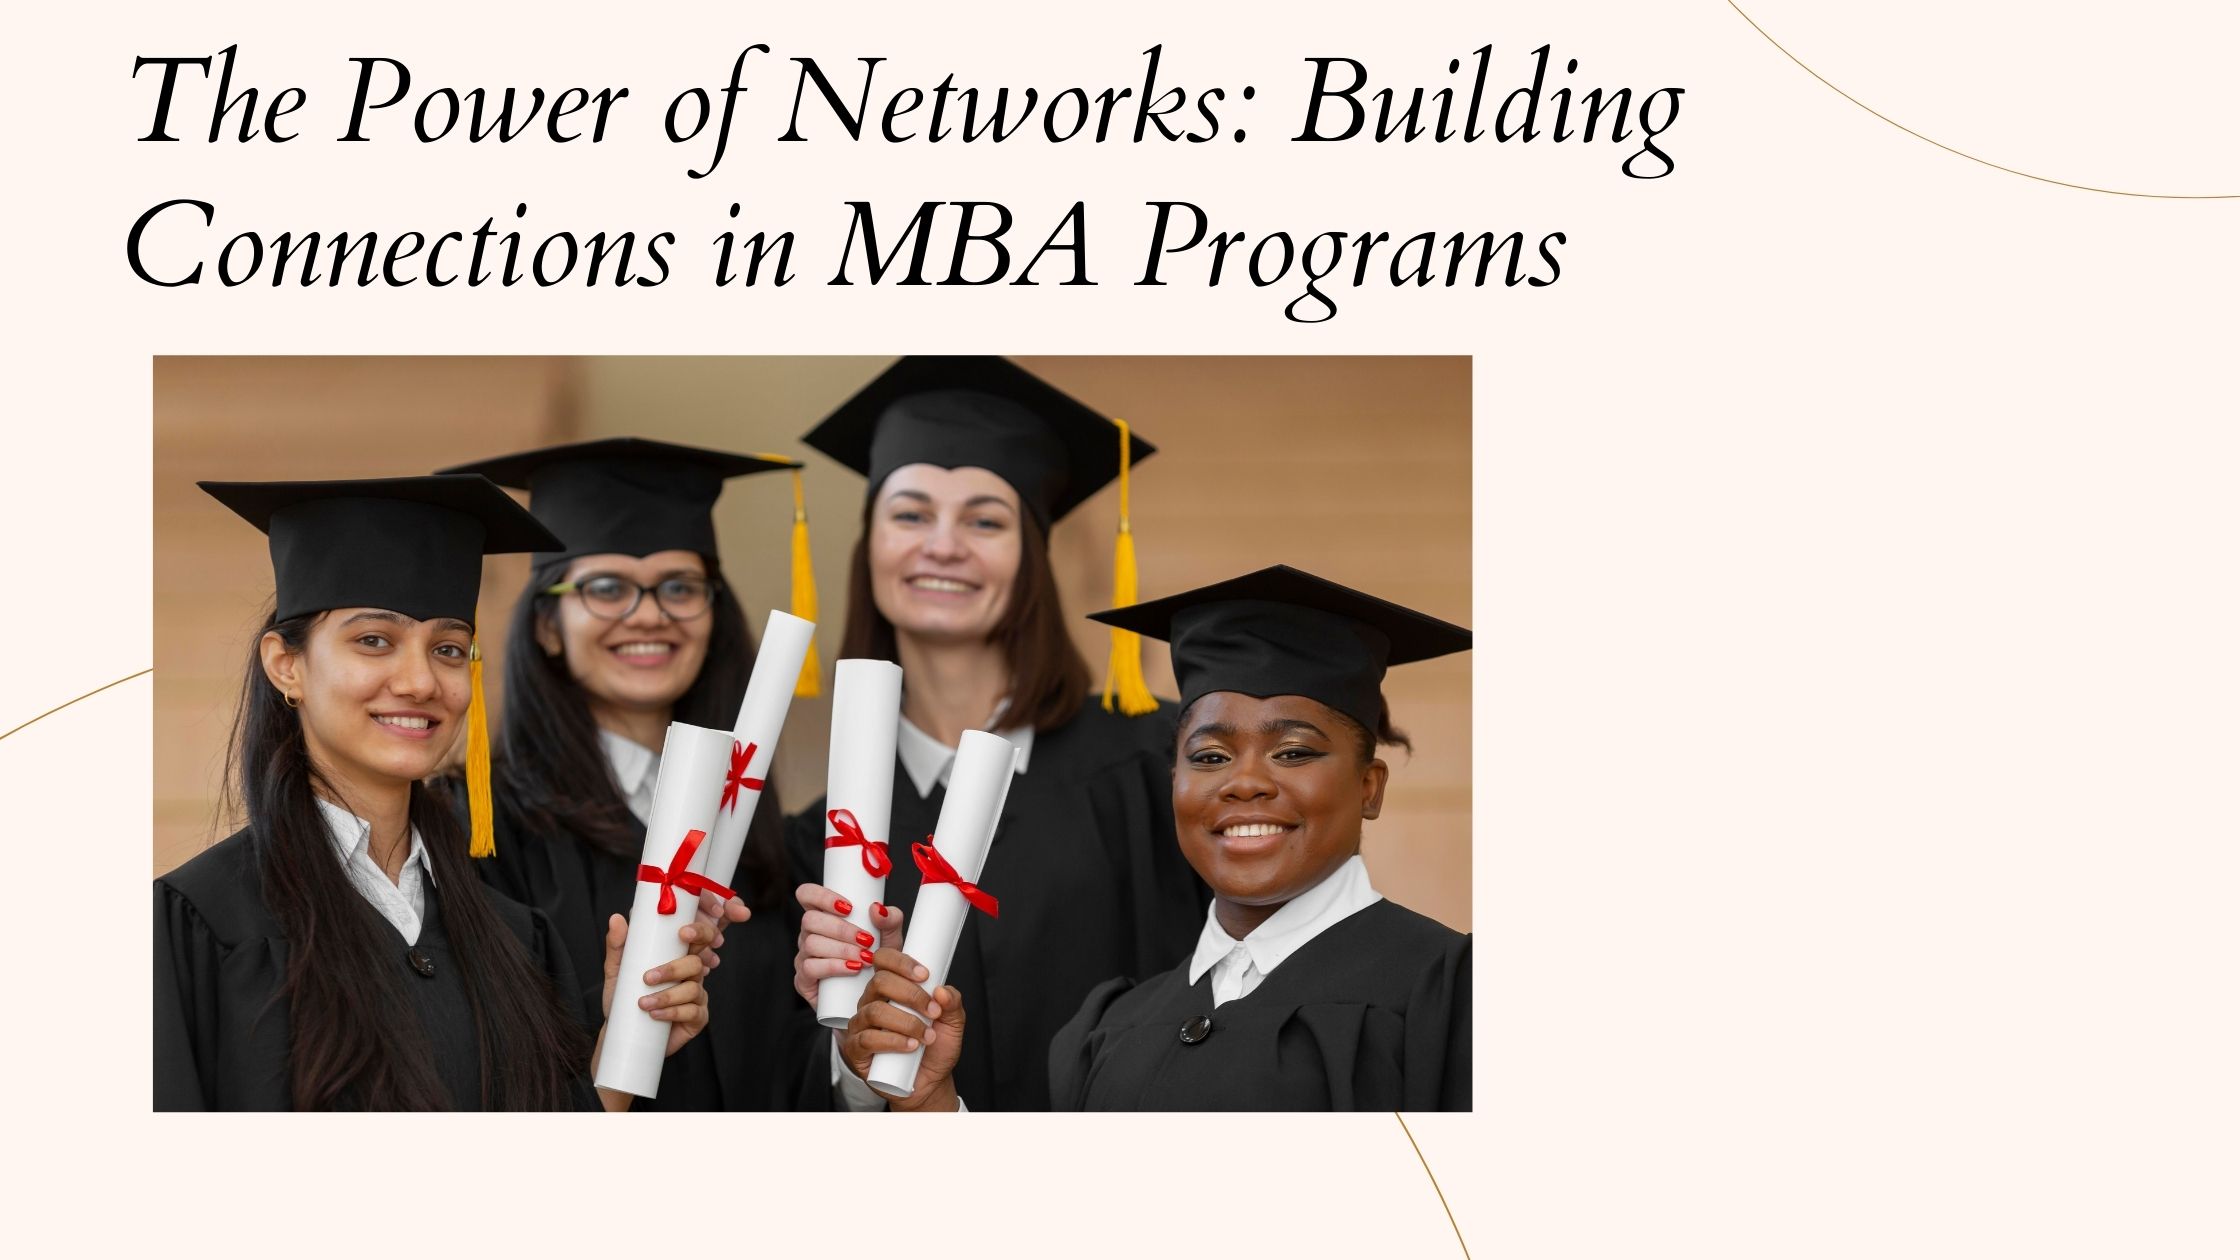 The Power of Networks: Building Connections in MBA Programs